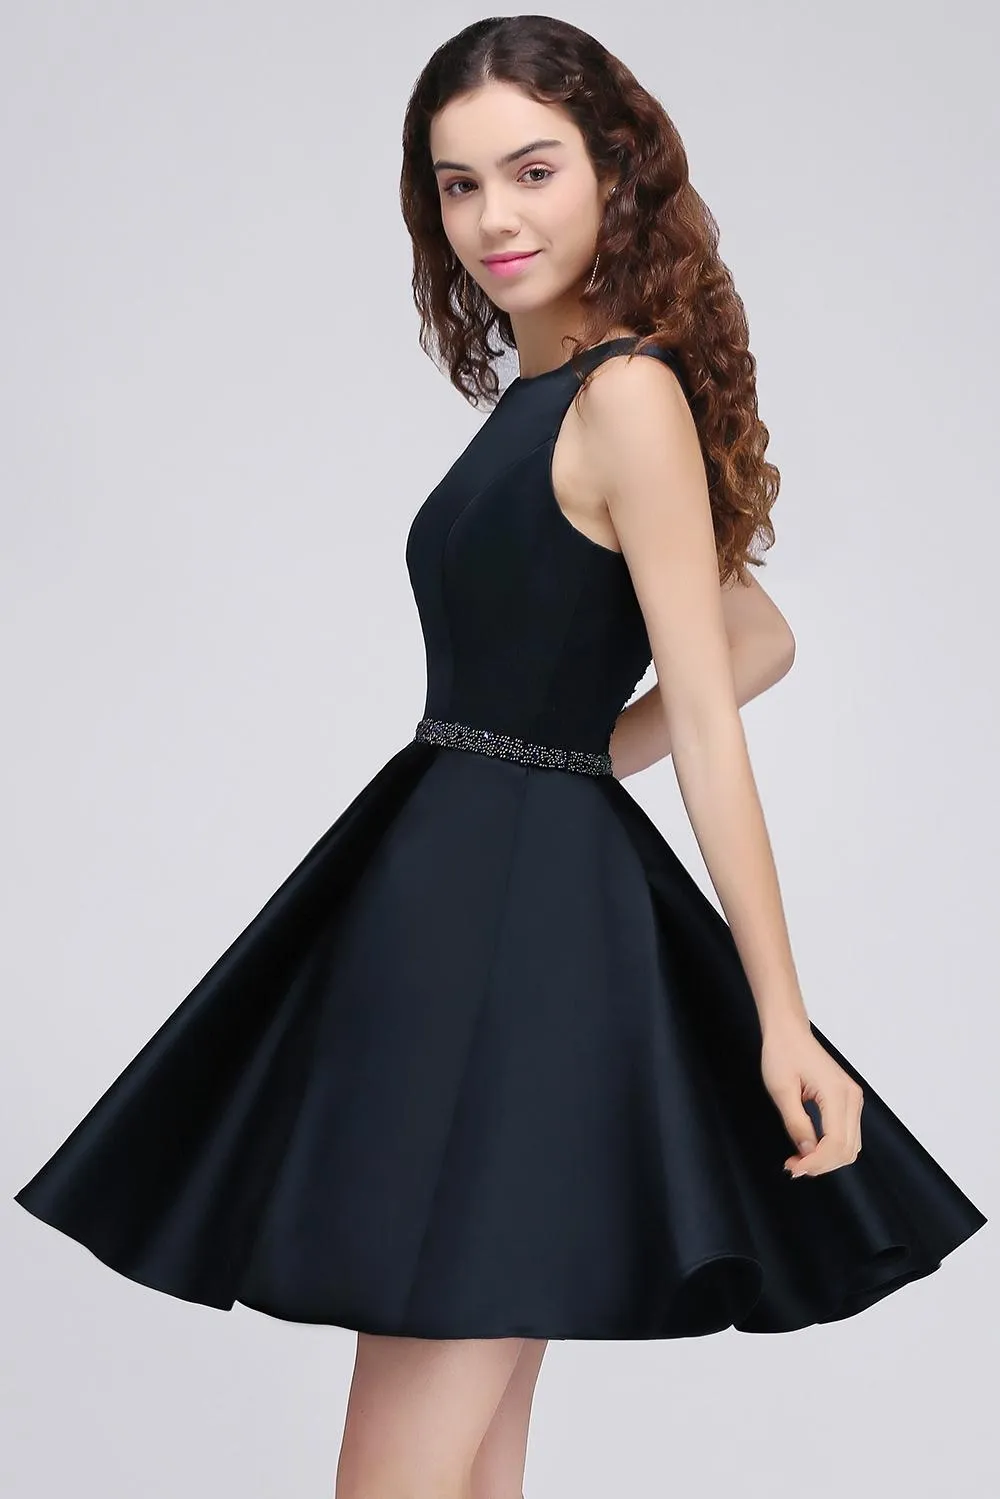 New Hot Dark Navy Crystals Homecoming Dresses Mini Short Sparkling Beaded Cocktail Party Wear Graduation Dresses HY209